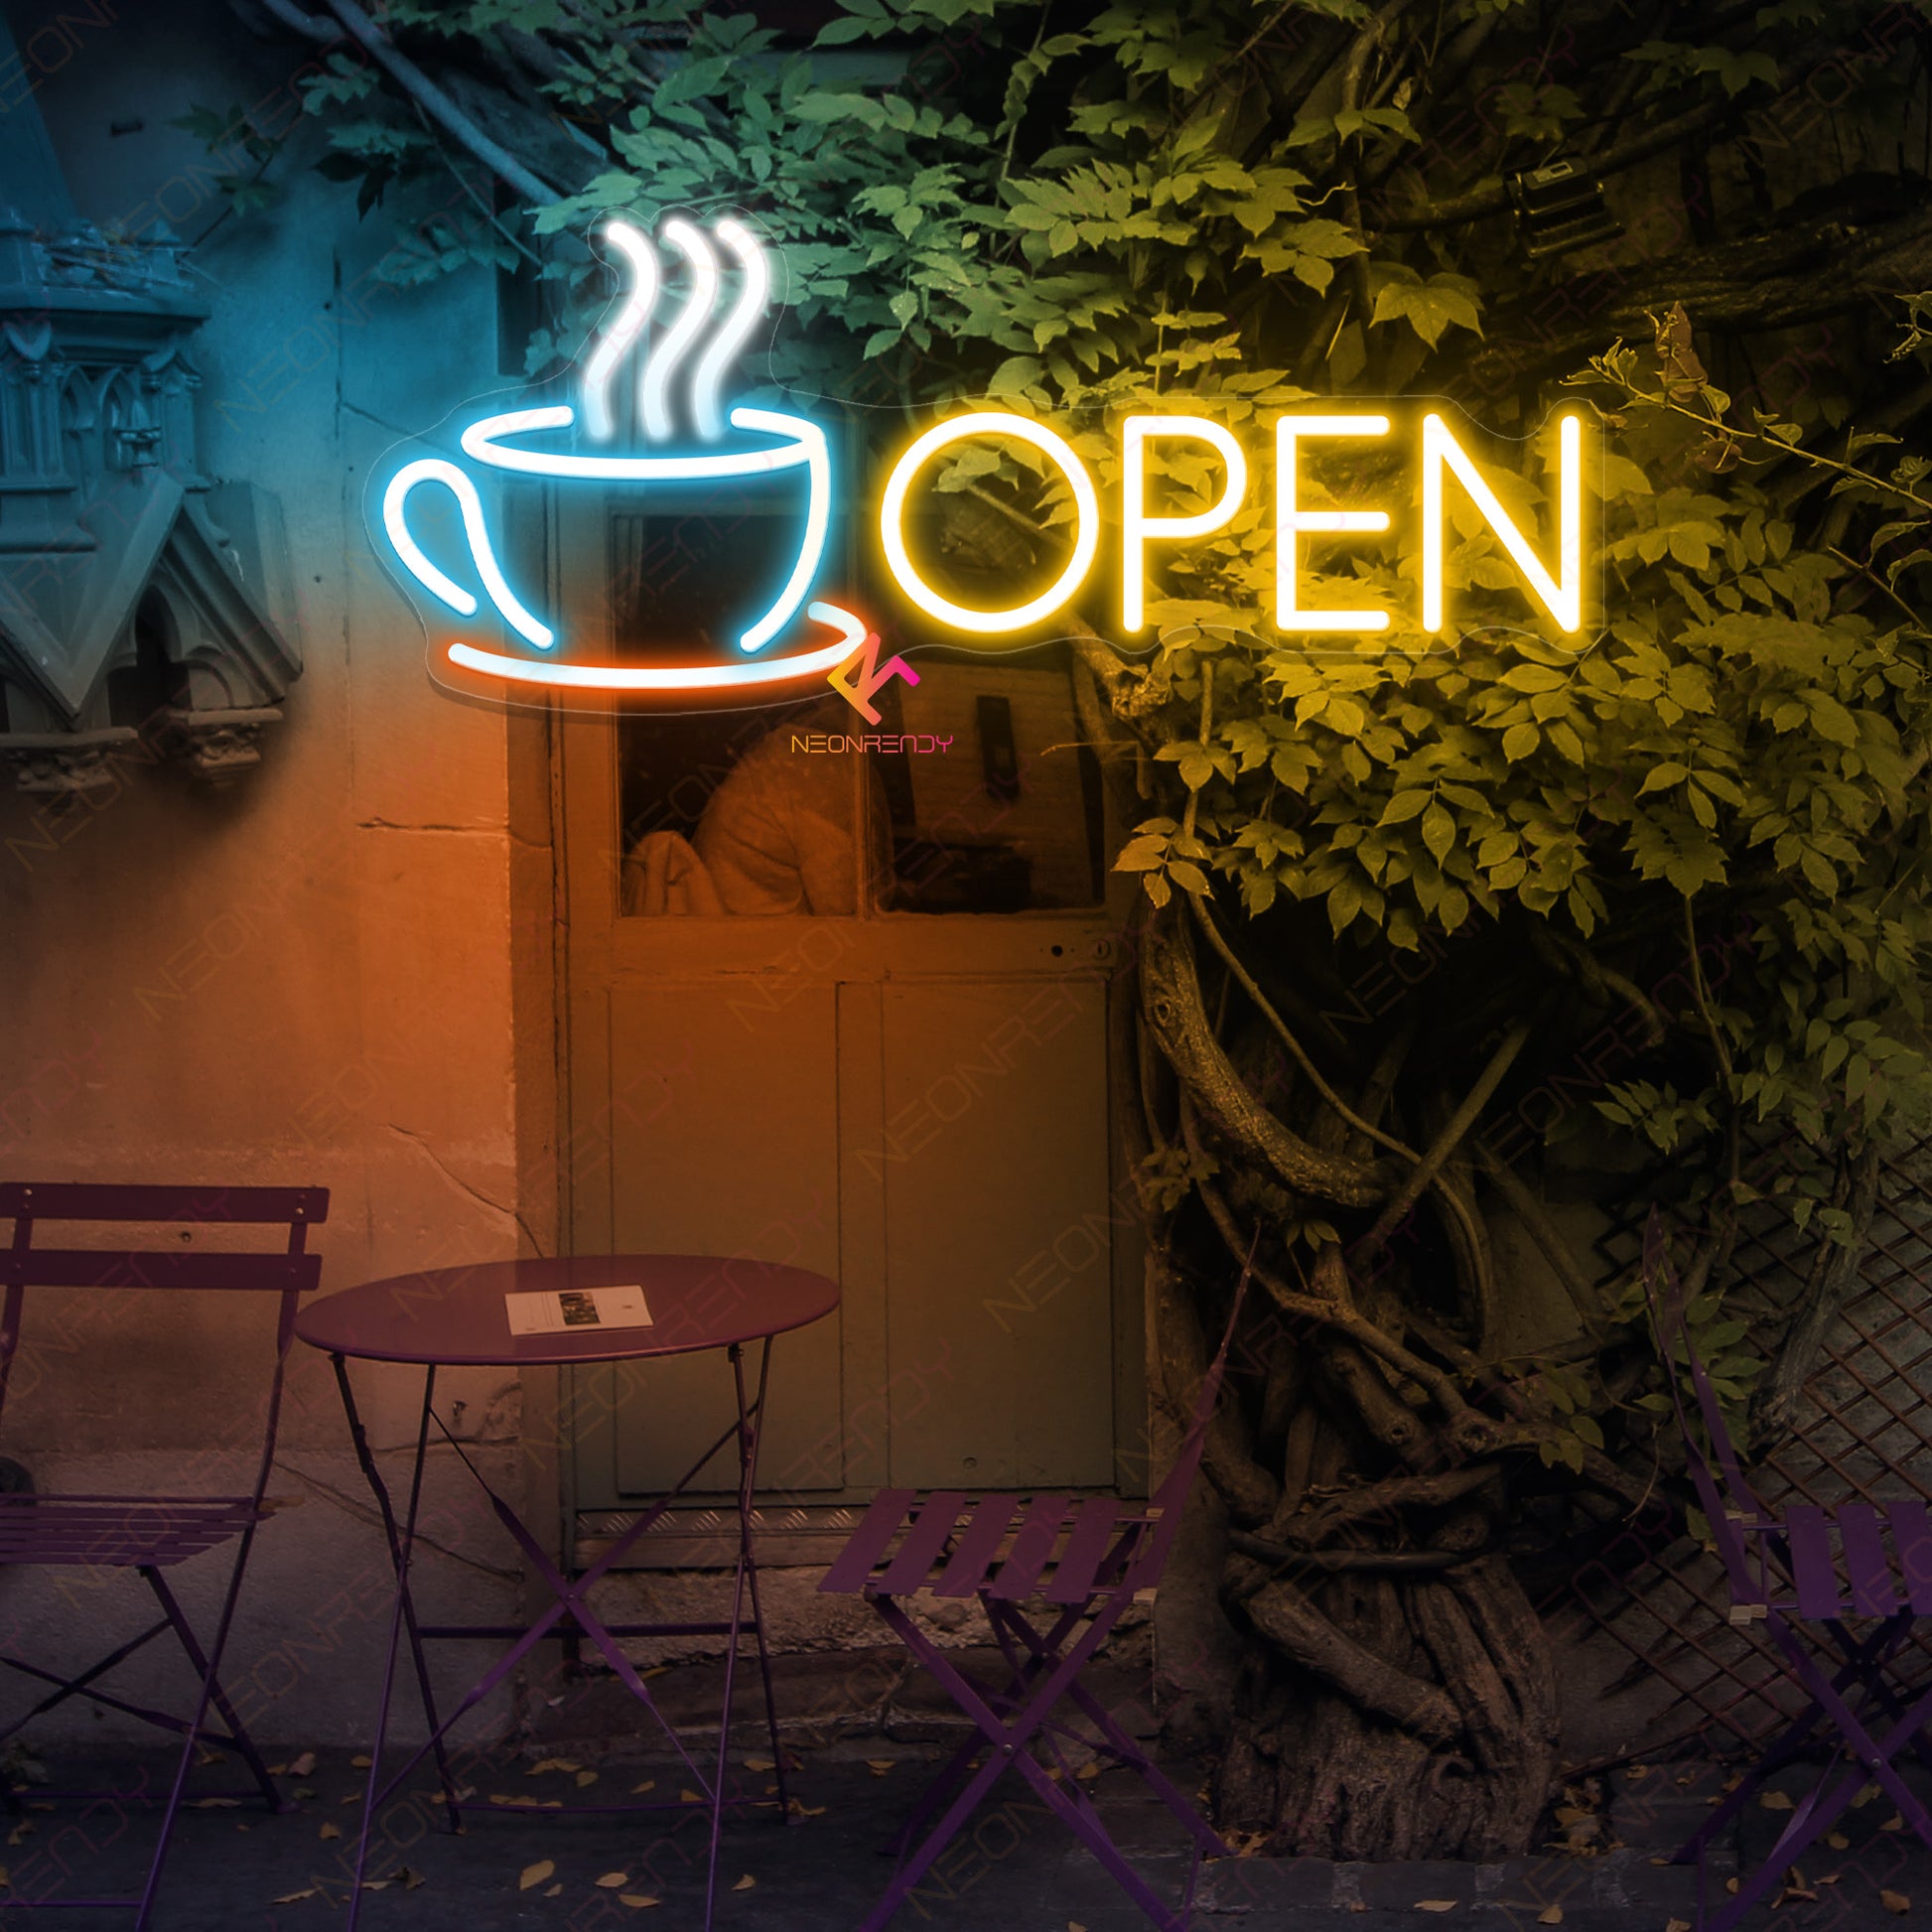 Cafe Open Neon Sign Coffee Shop Led Light orange yellow